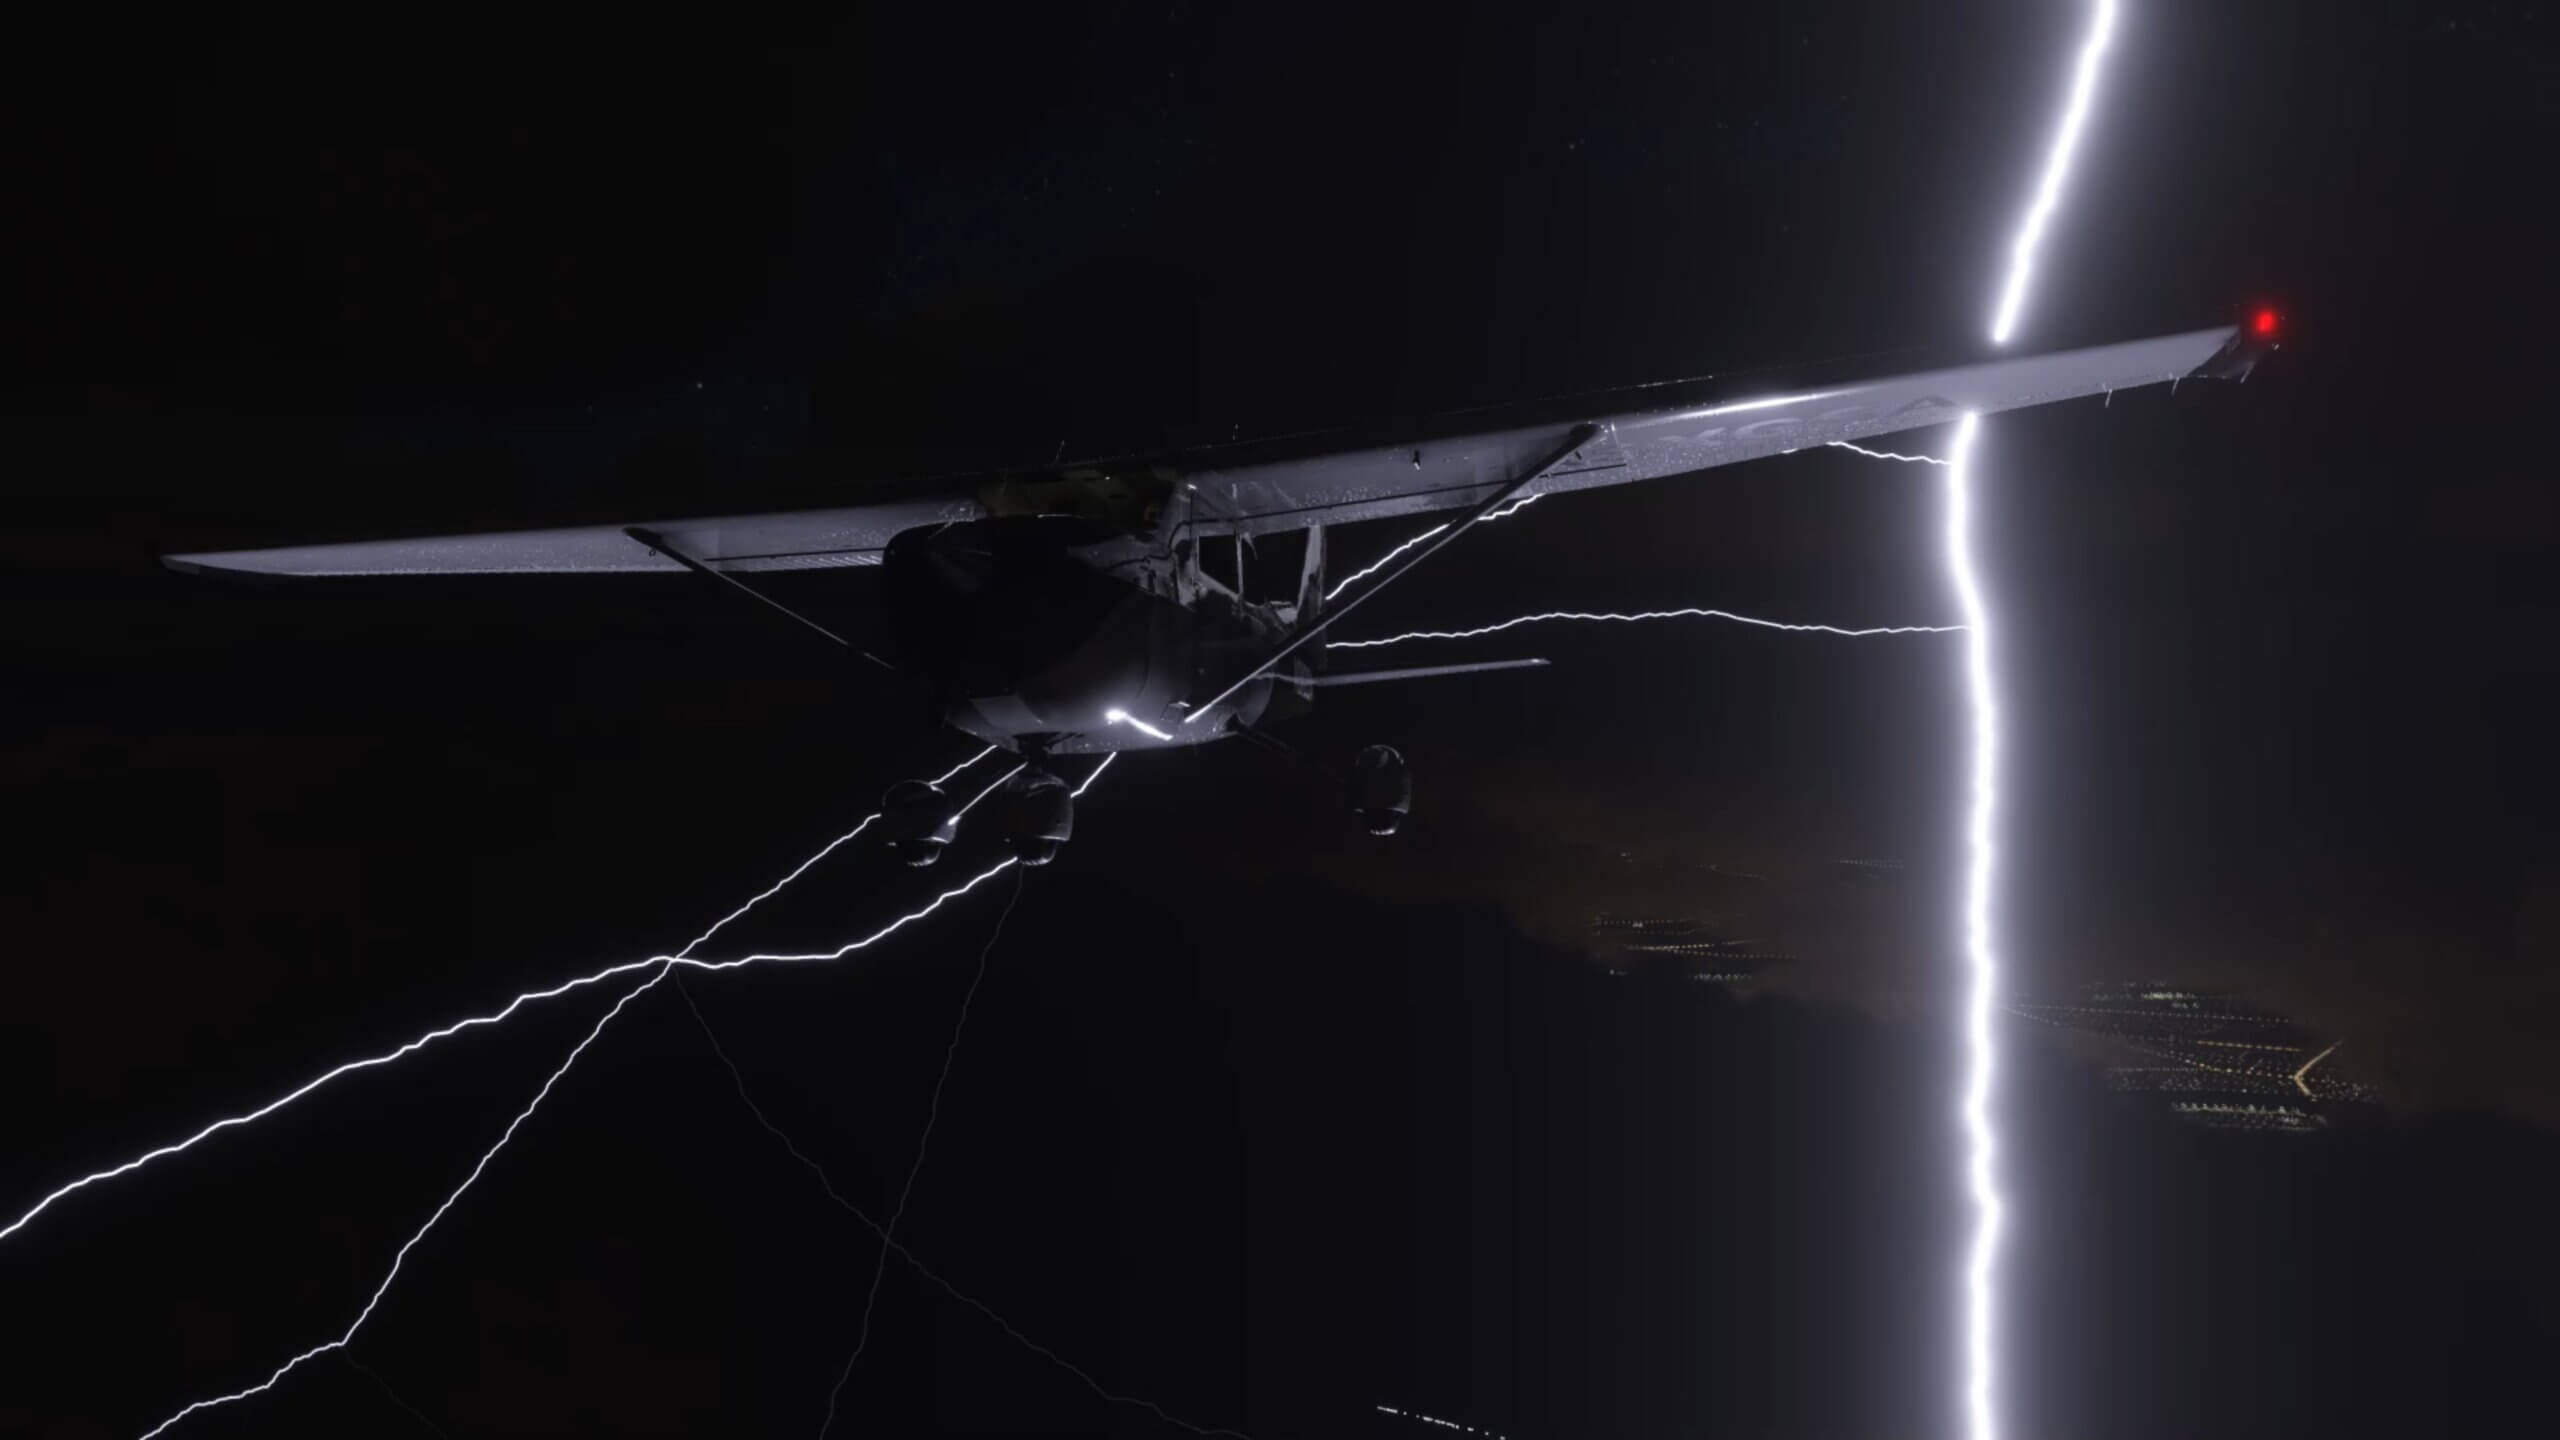 A Cessna 172 comes within close range of a lightning strike, with the bright flash illuminating the underside of the aircrafts wing.